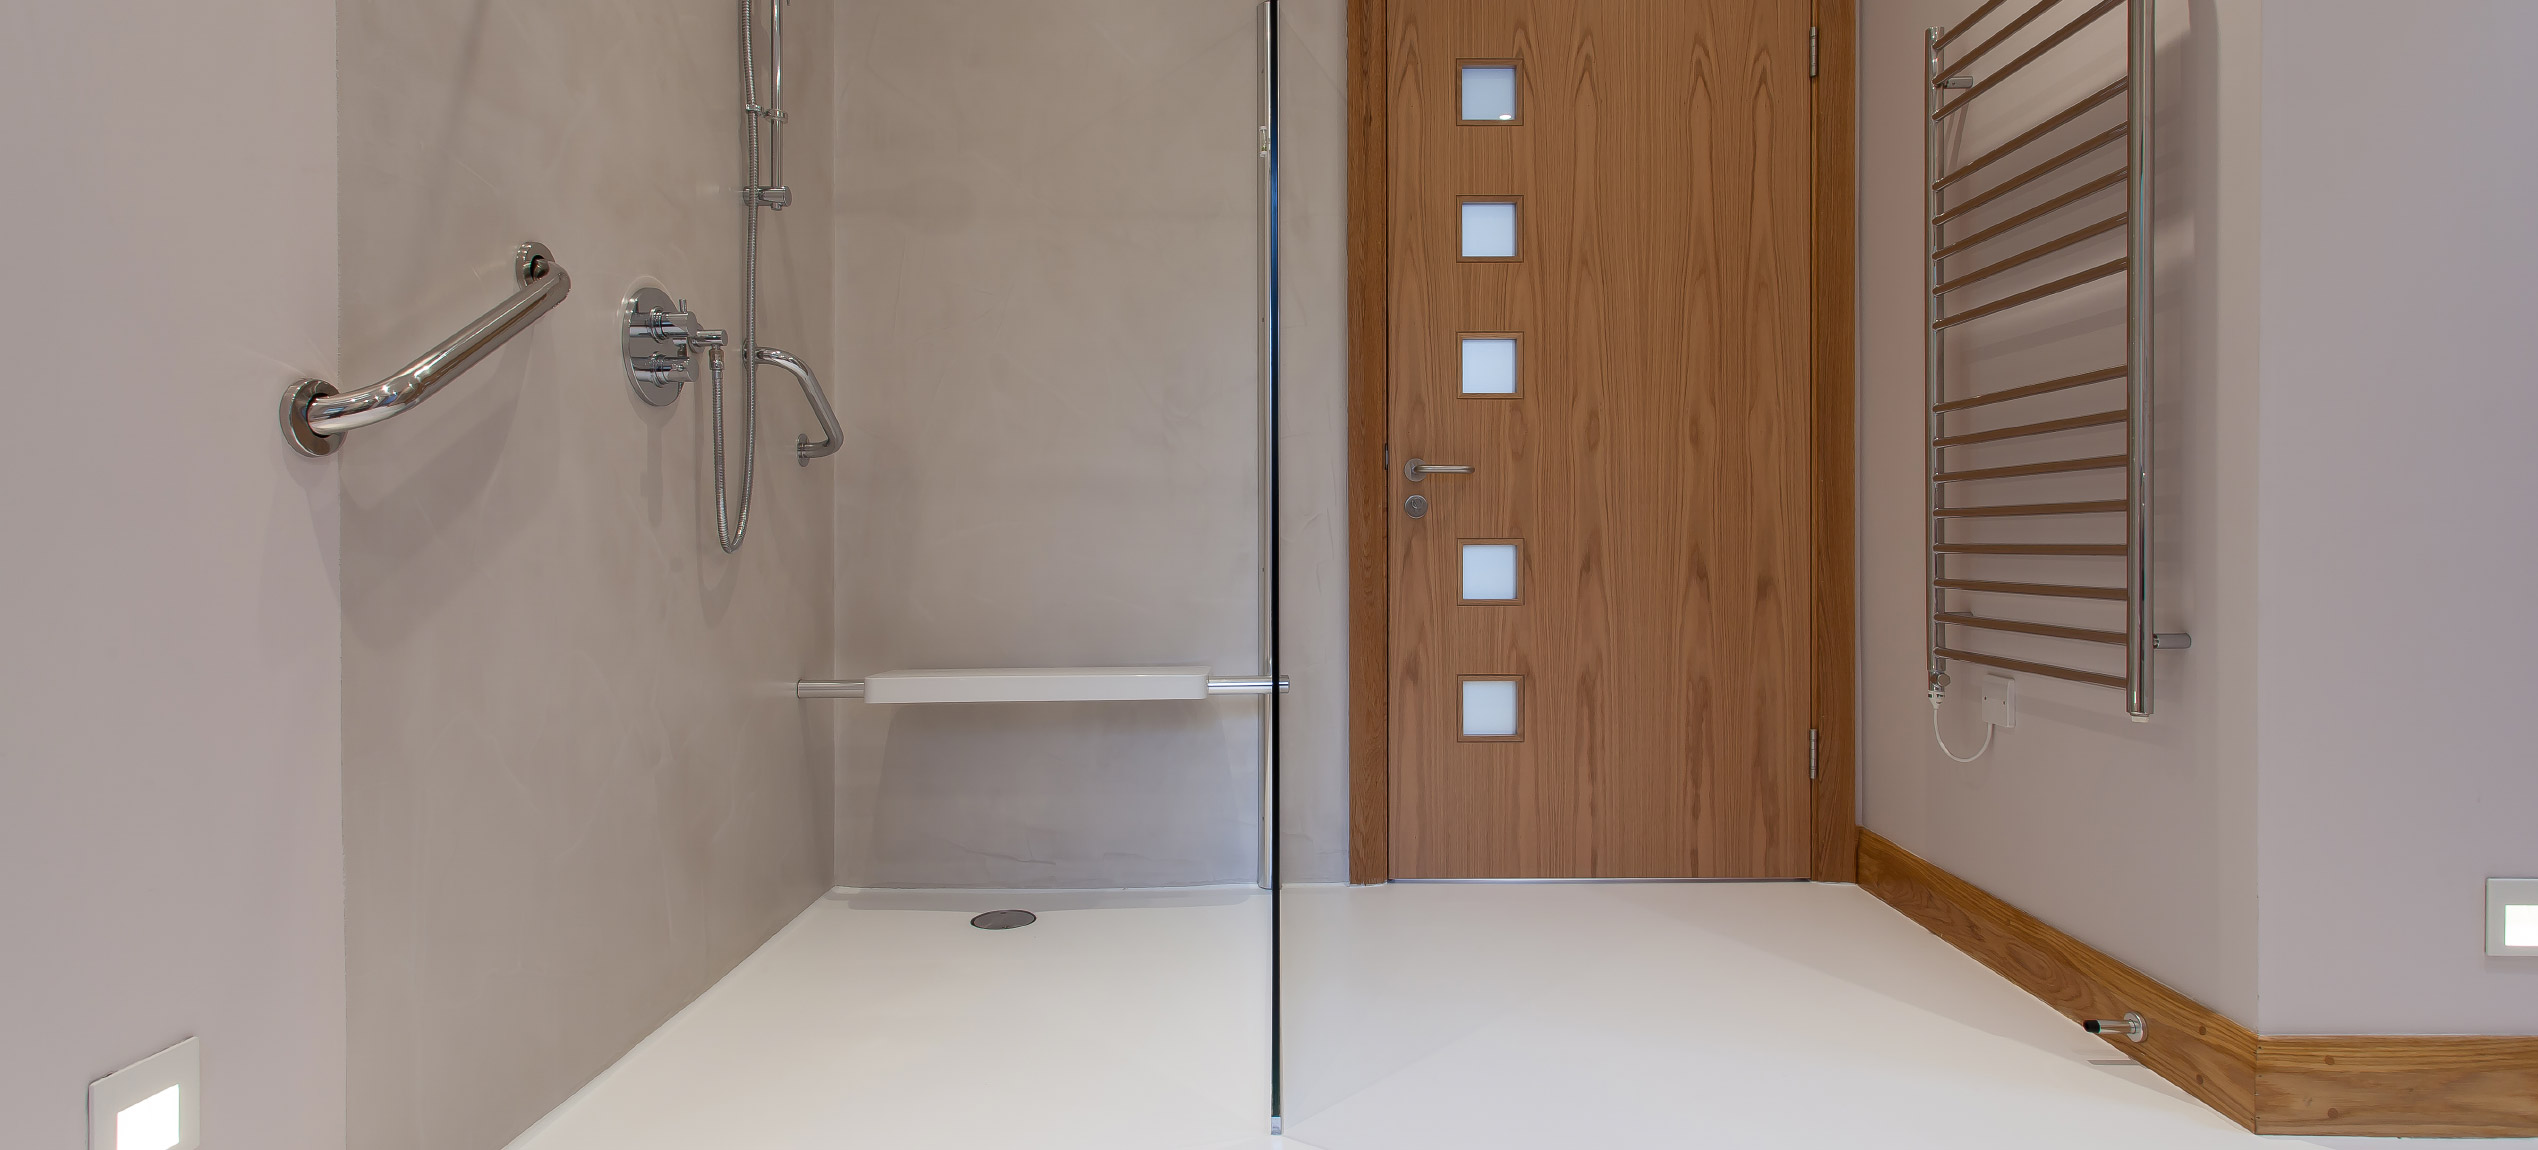 Wet room with Sphere8 resin floors and walls